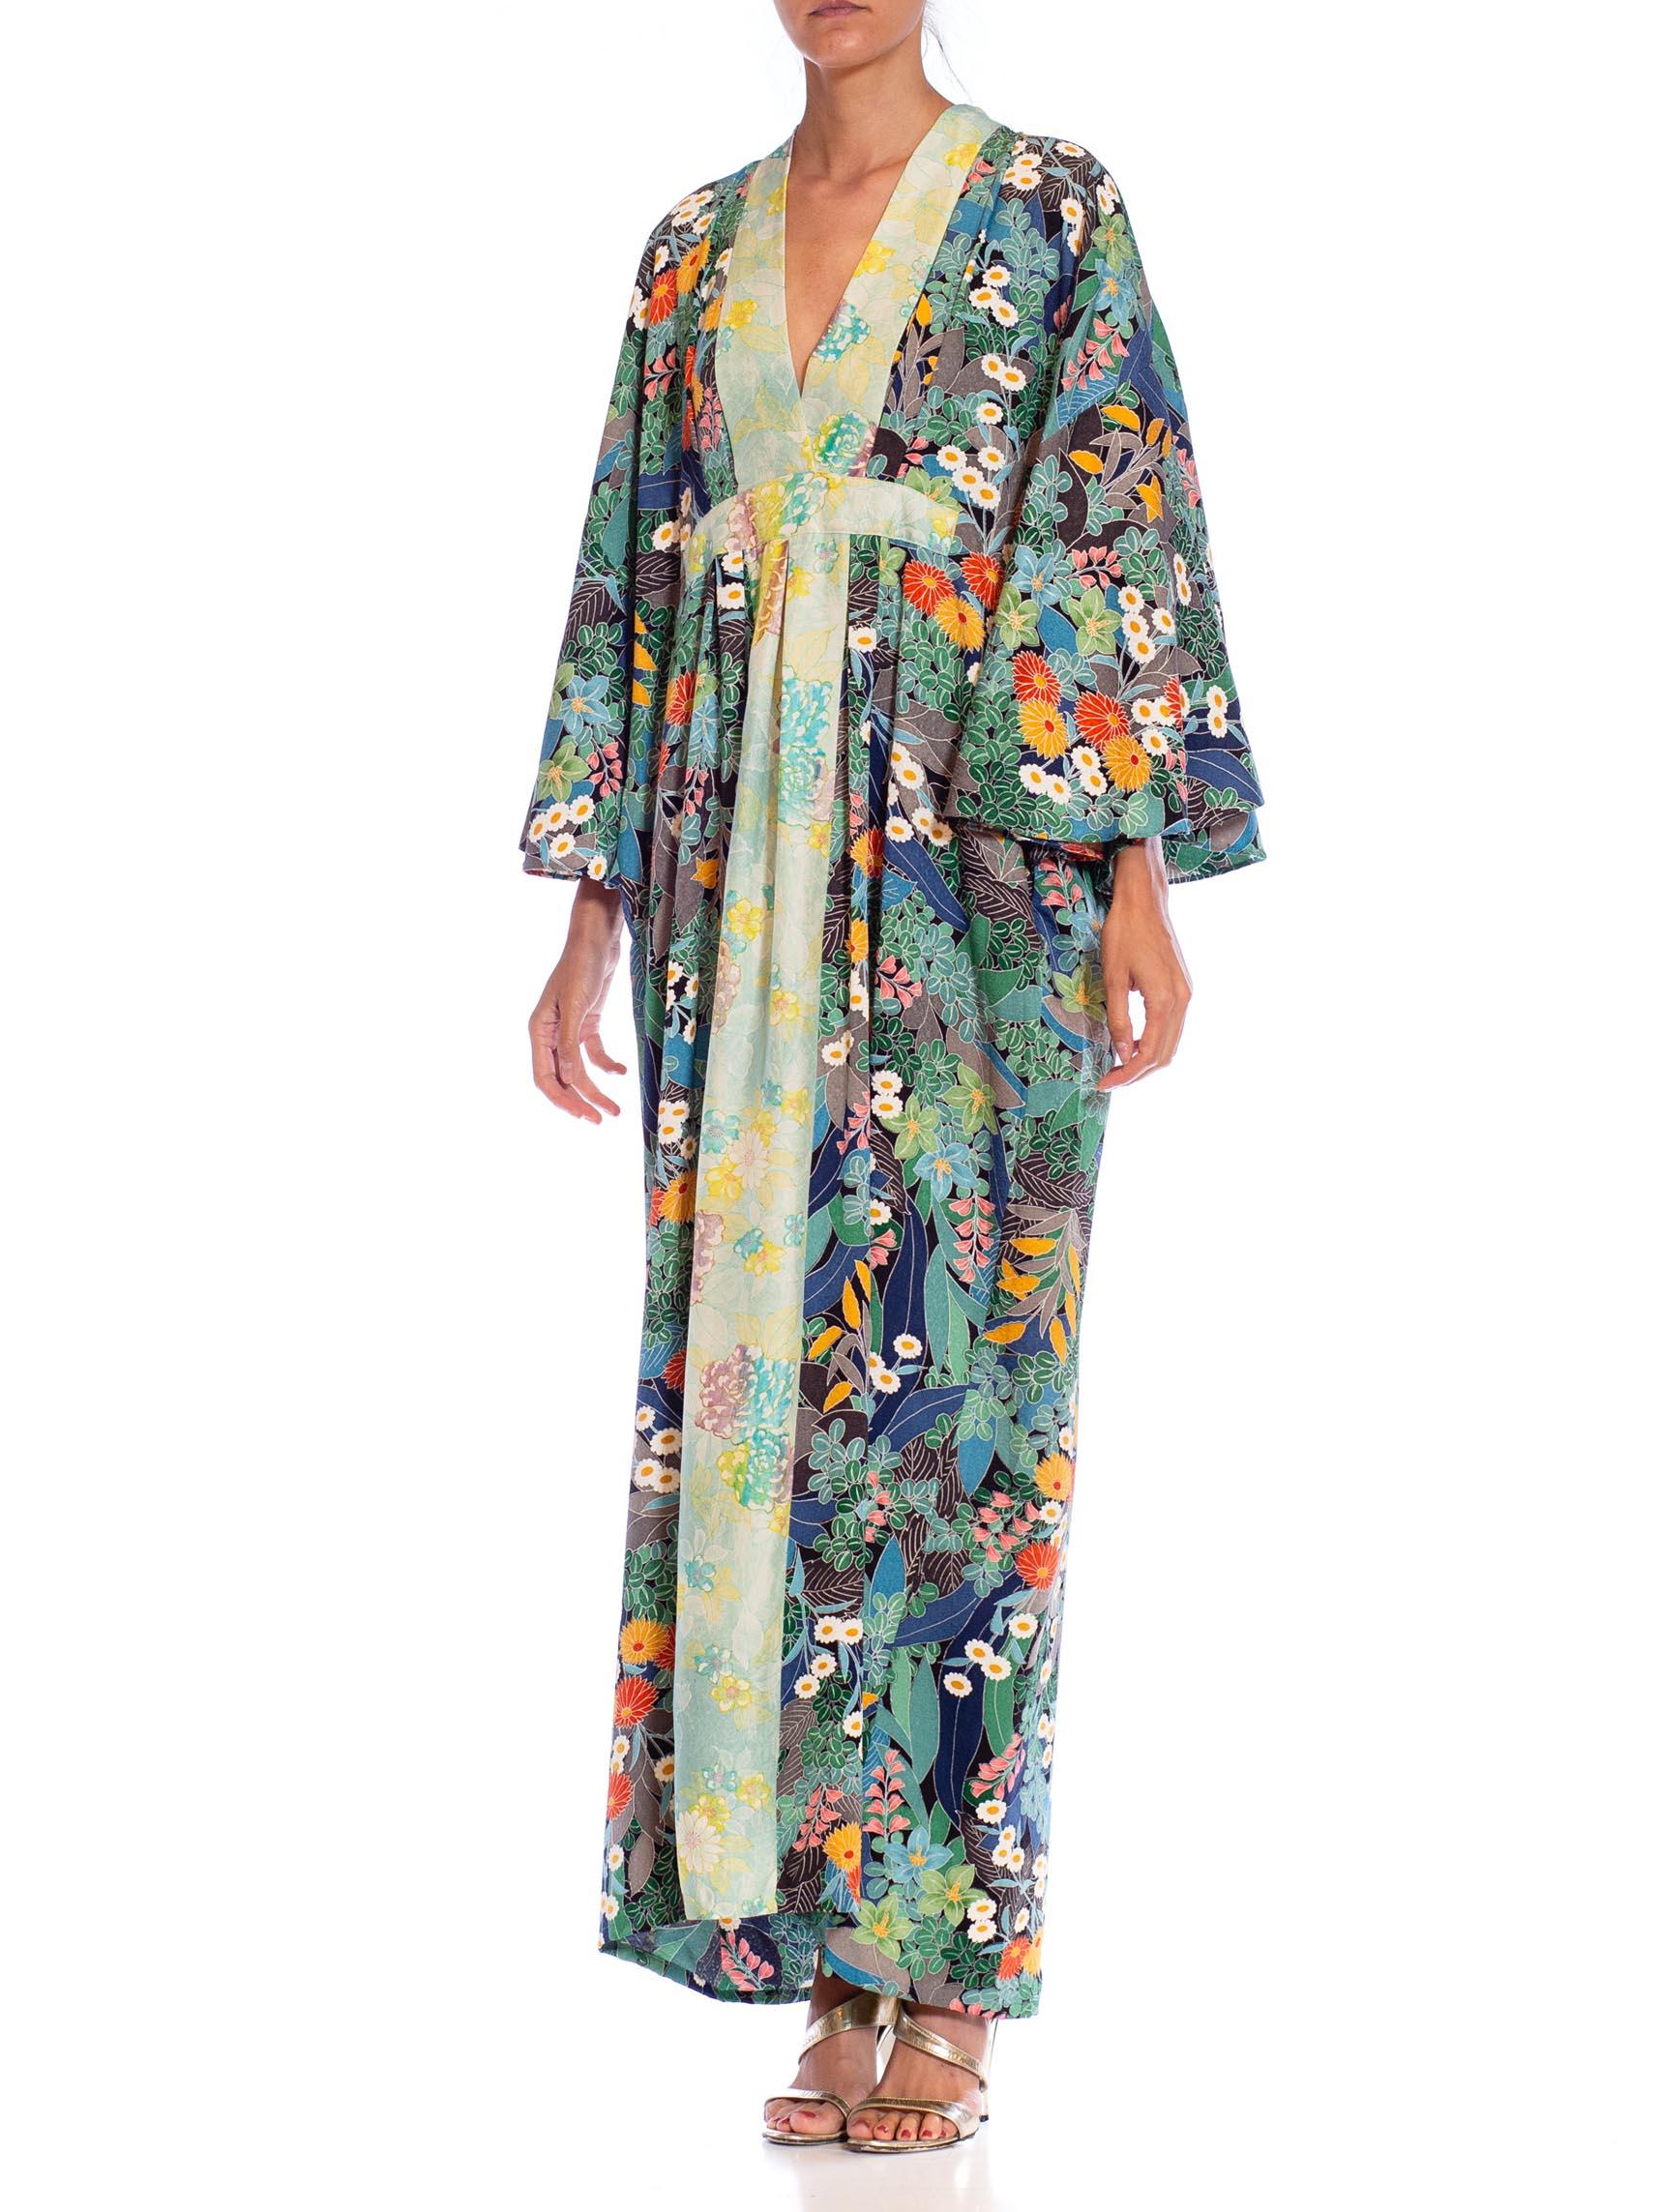 MORPHEW COLLECTION Bluenavy Blue Japanese Kimono Silk Floral Pattern Kaftan Lig In Excellent Condition For Sale In New York, NY